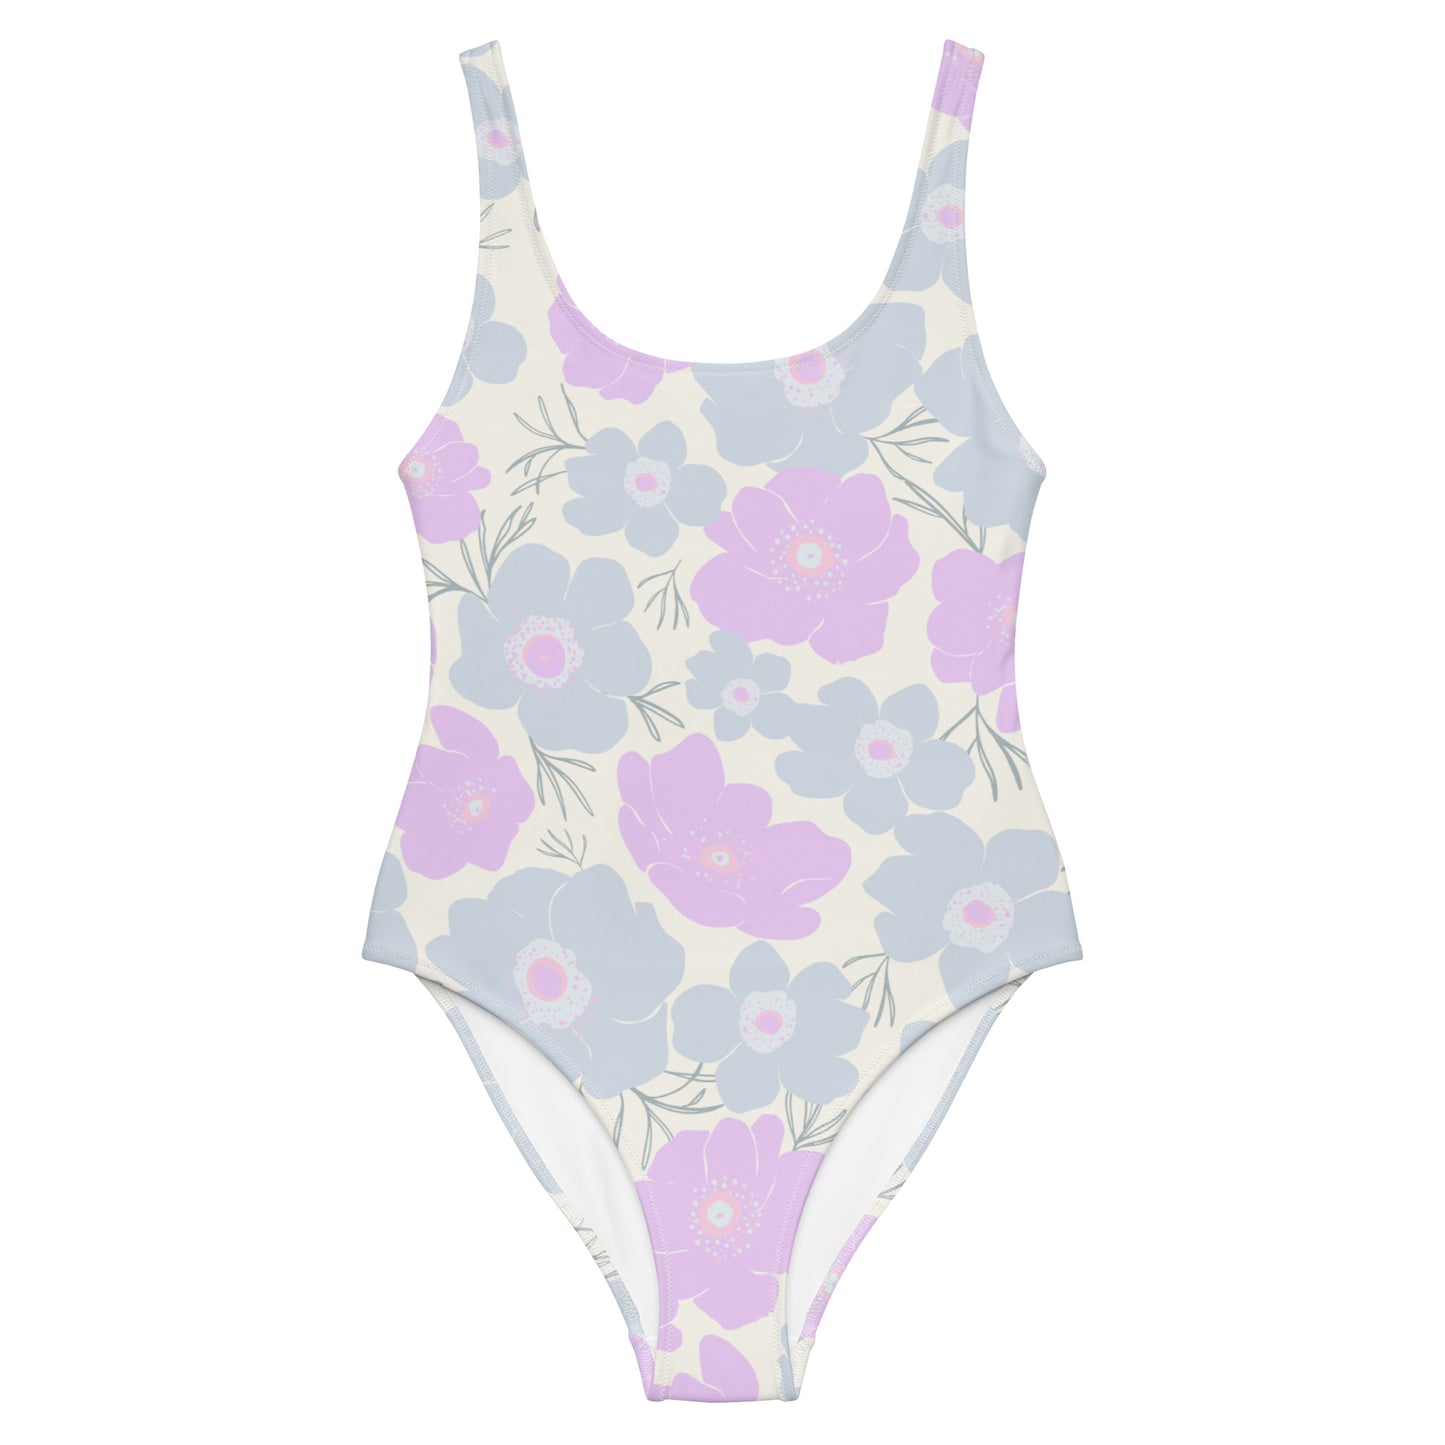 Pastel Floral - Sustainably Made One-Piece Swimsuit